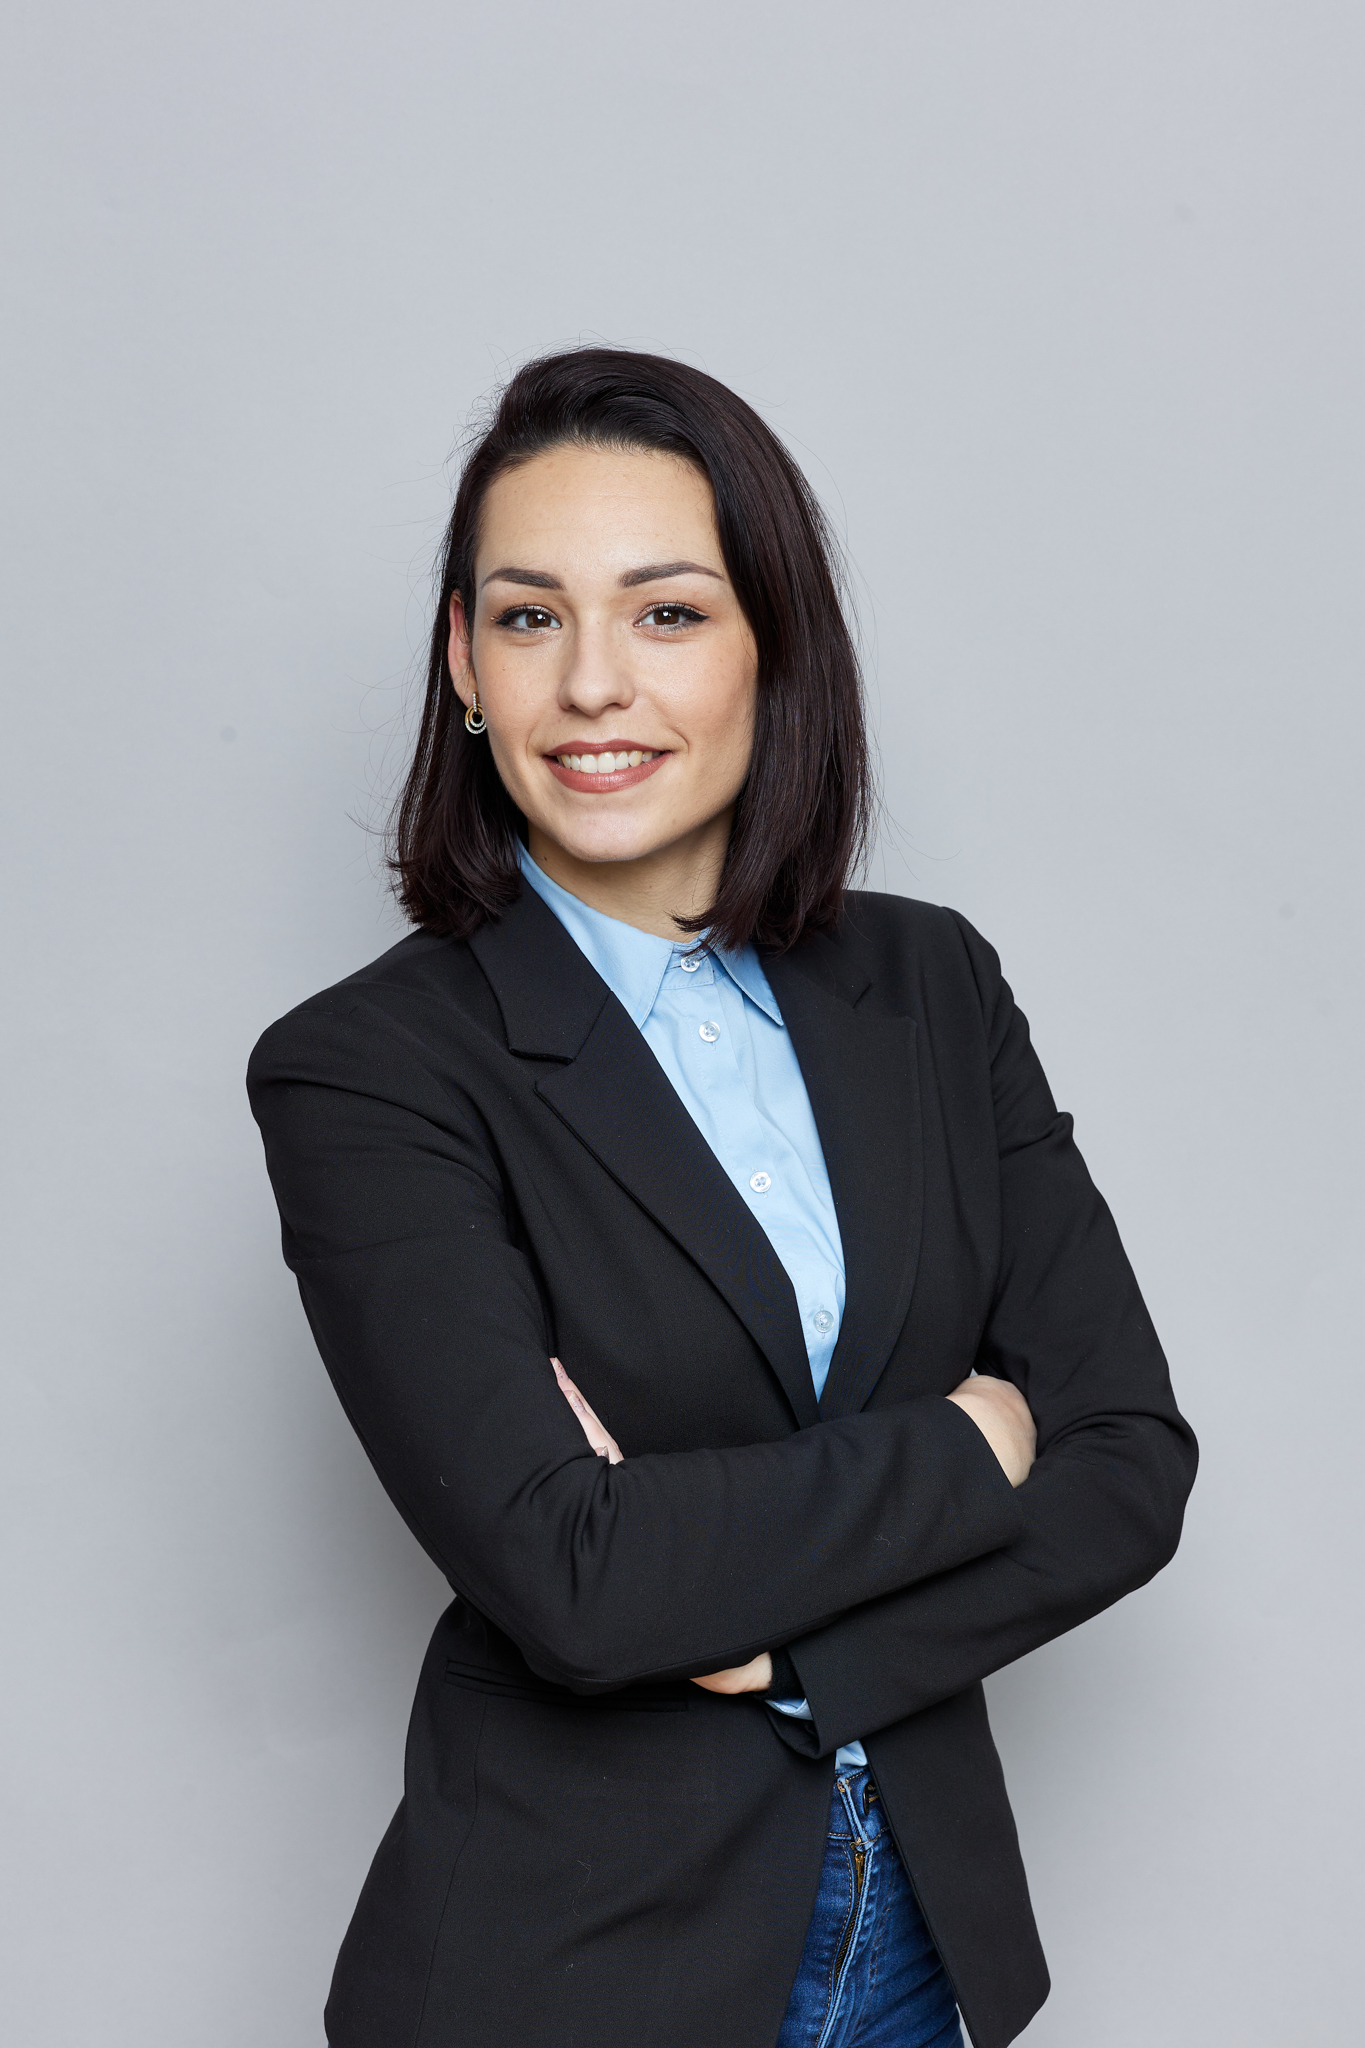 A young business woman posing with her arms crossed on a gray background for event photography.